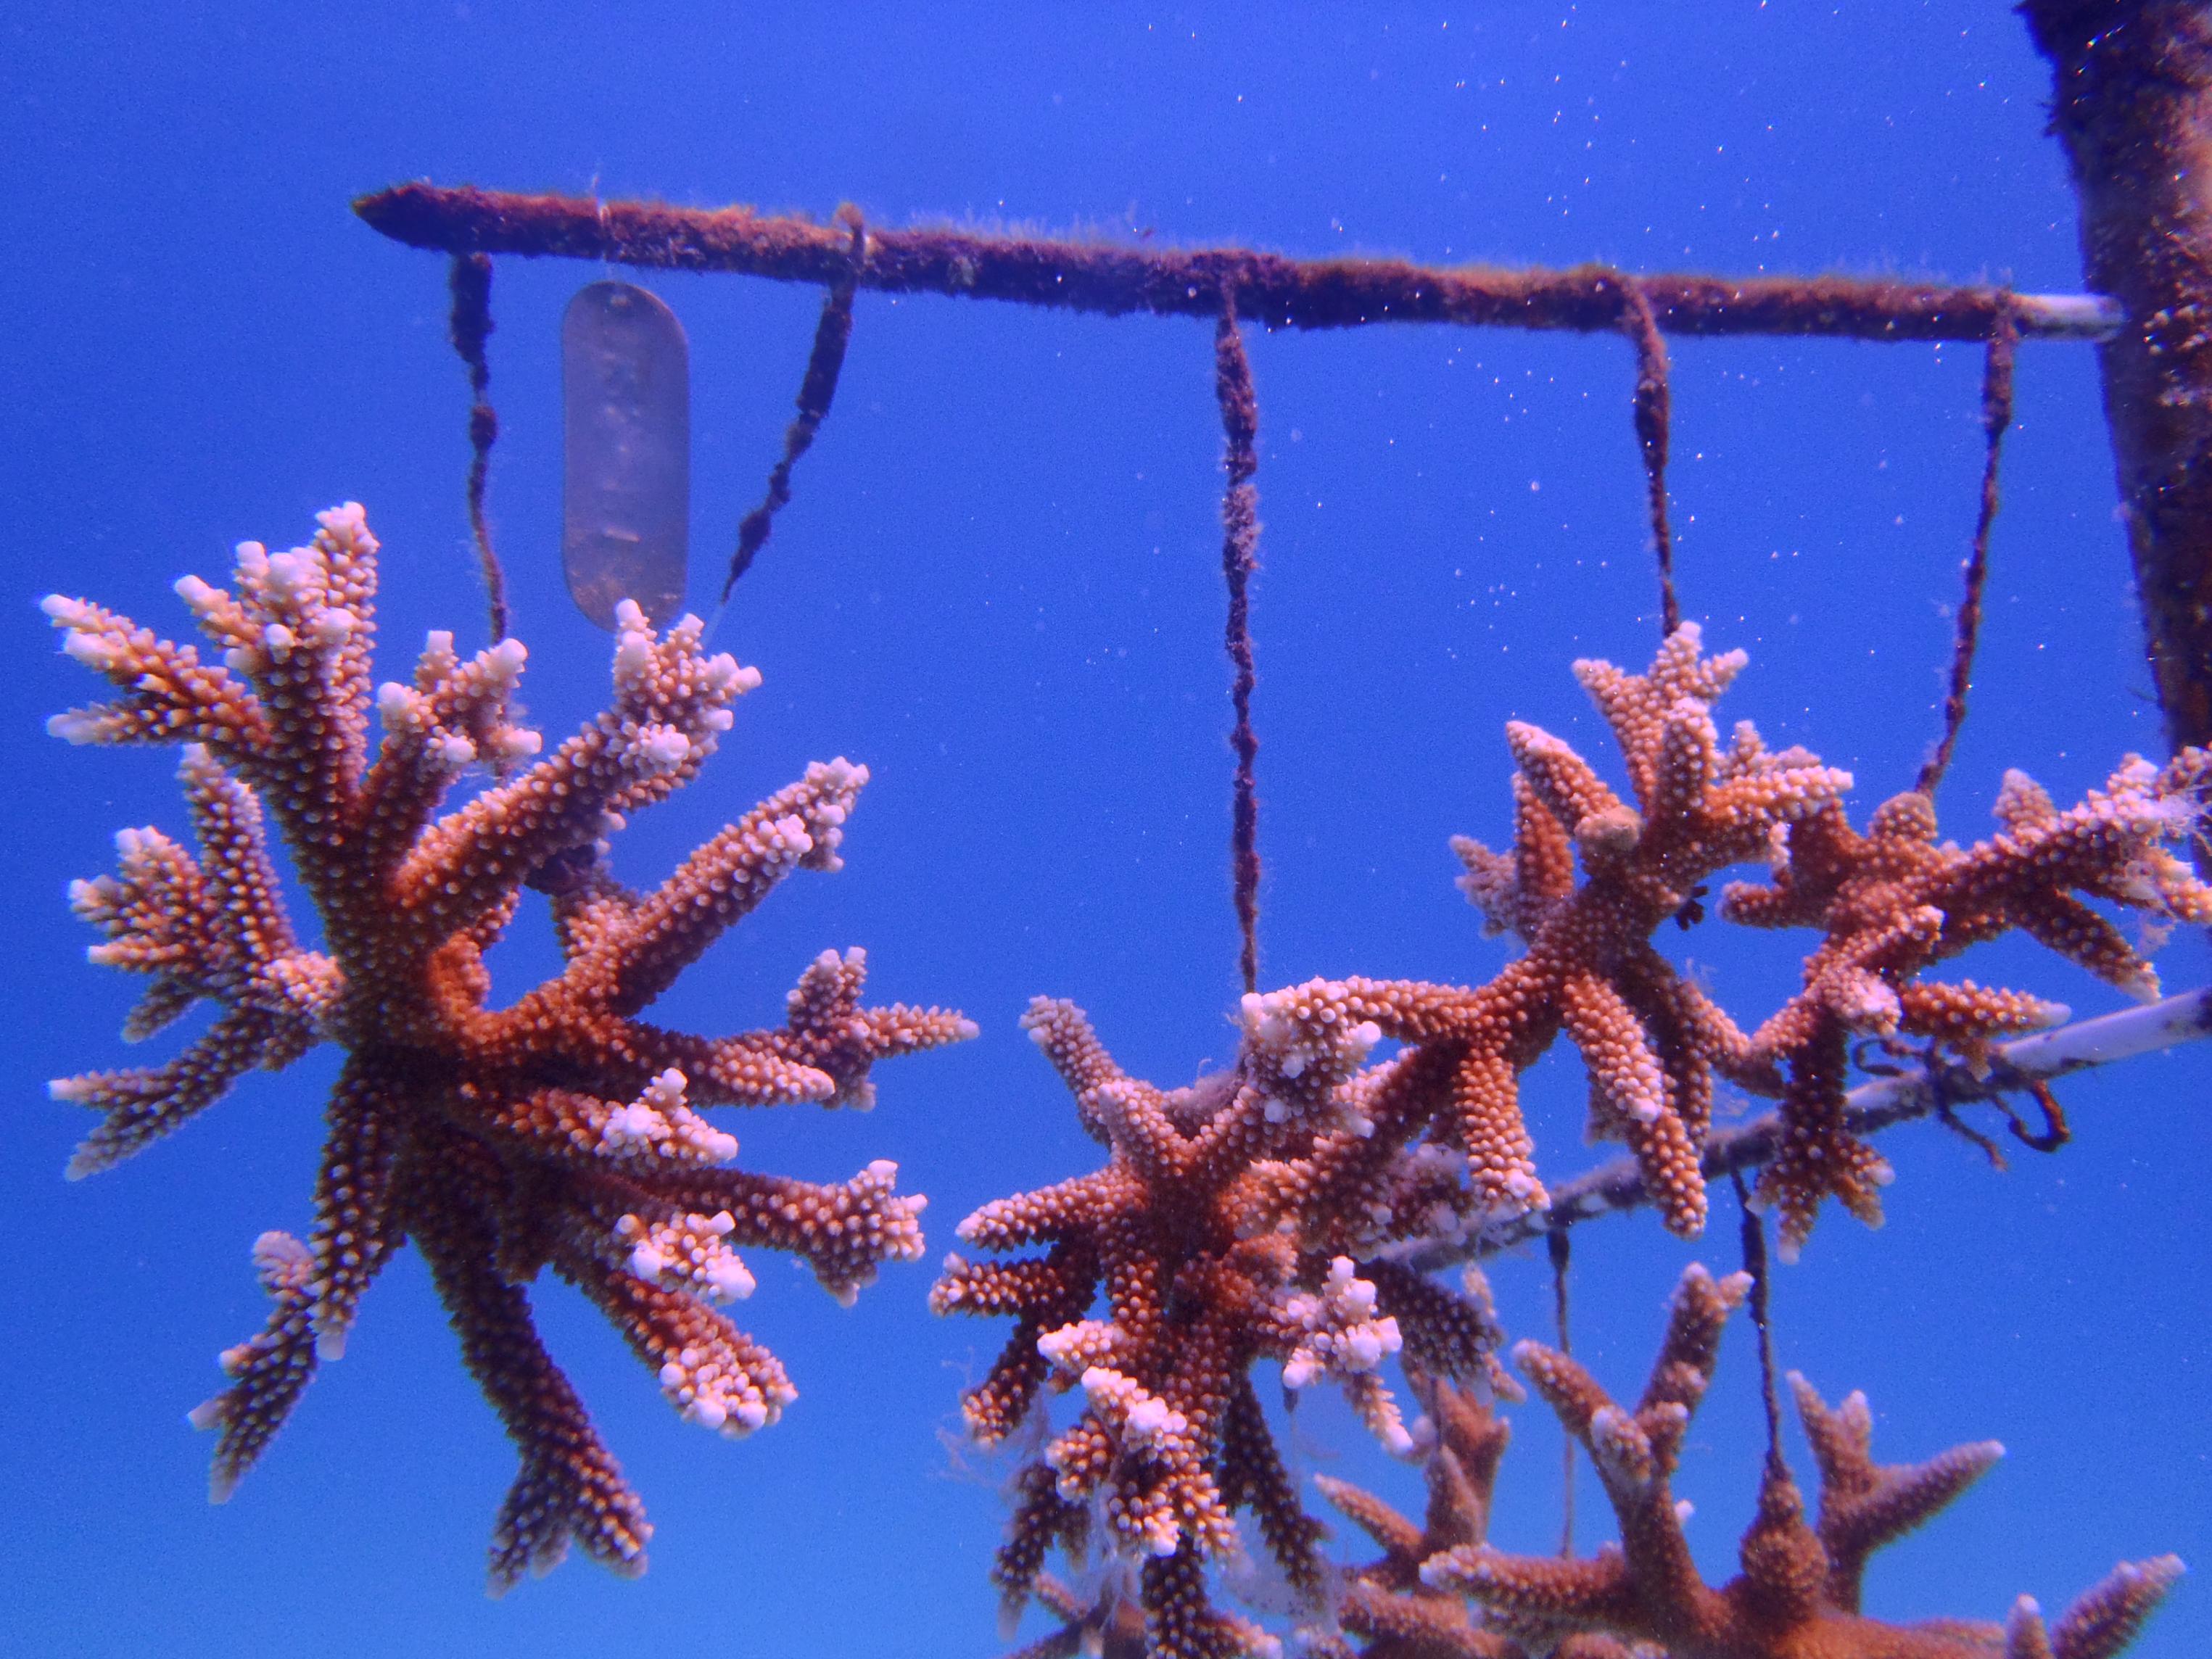 Researchers in the Florida Keys visited our staghorn coral nursery to conduct a quarterly inventory.